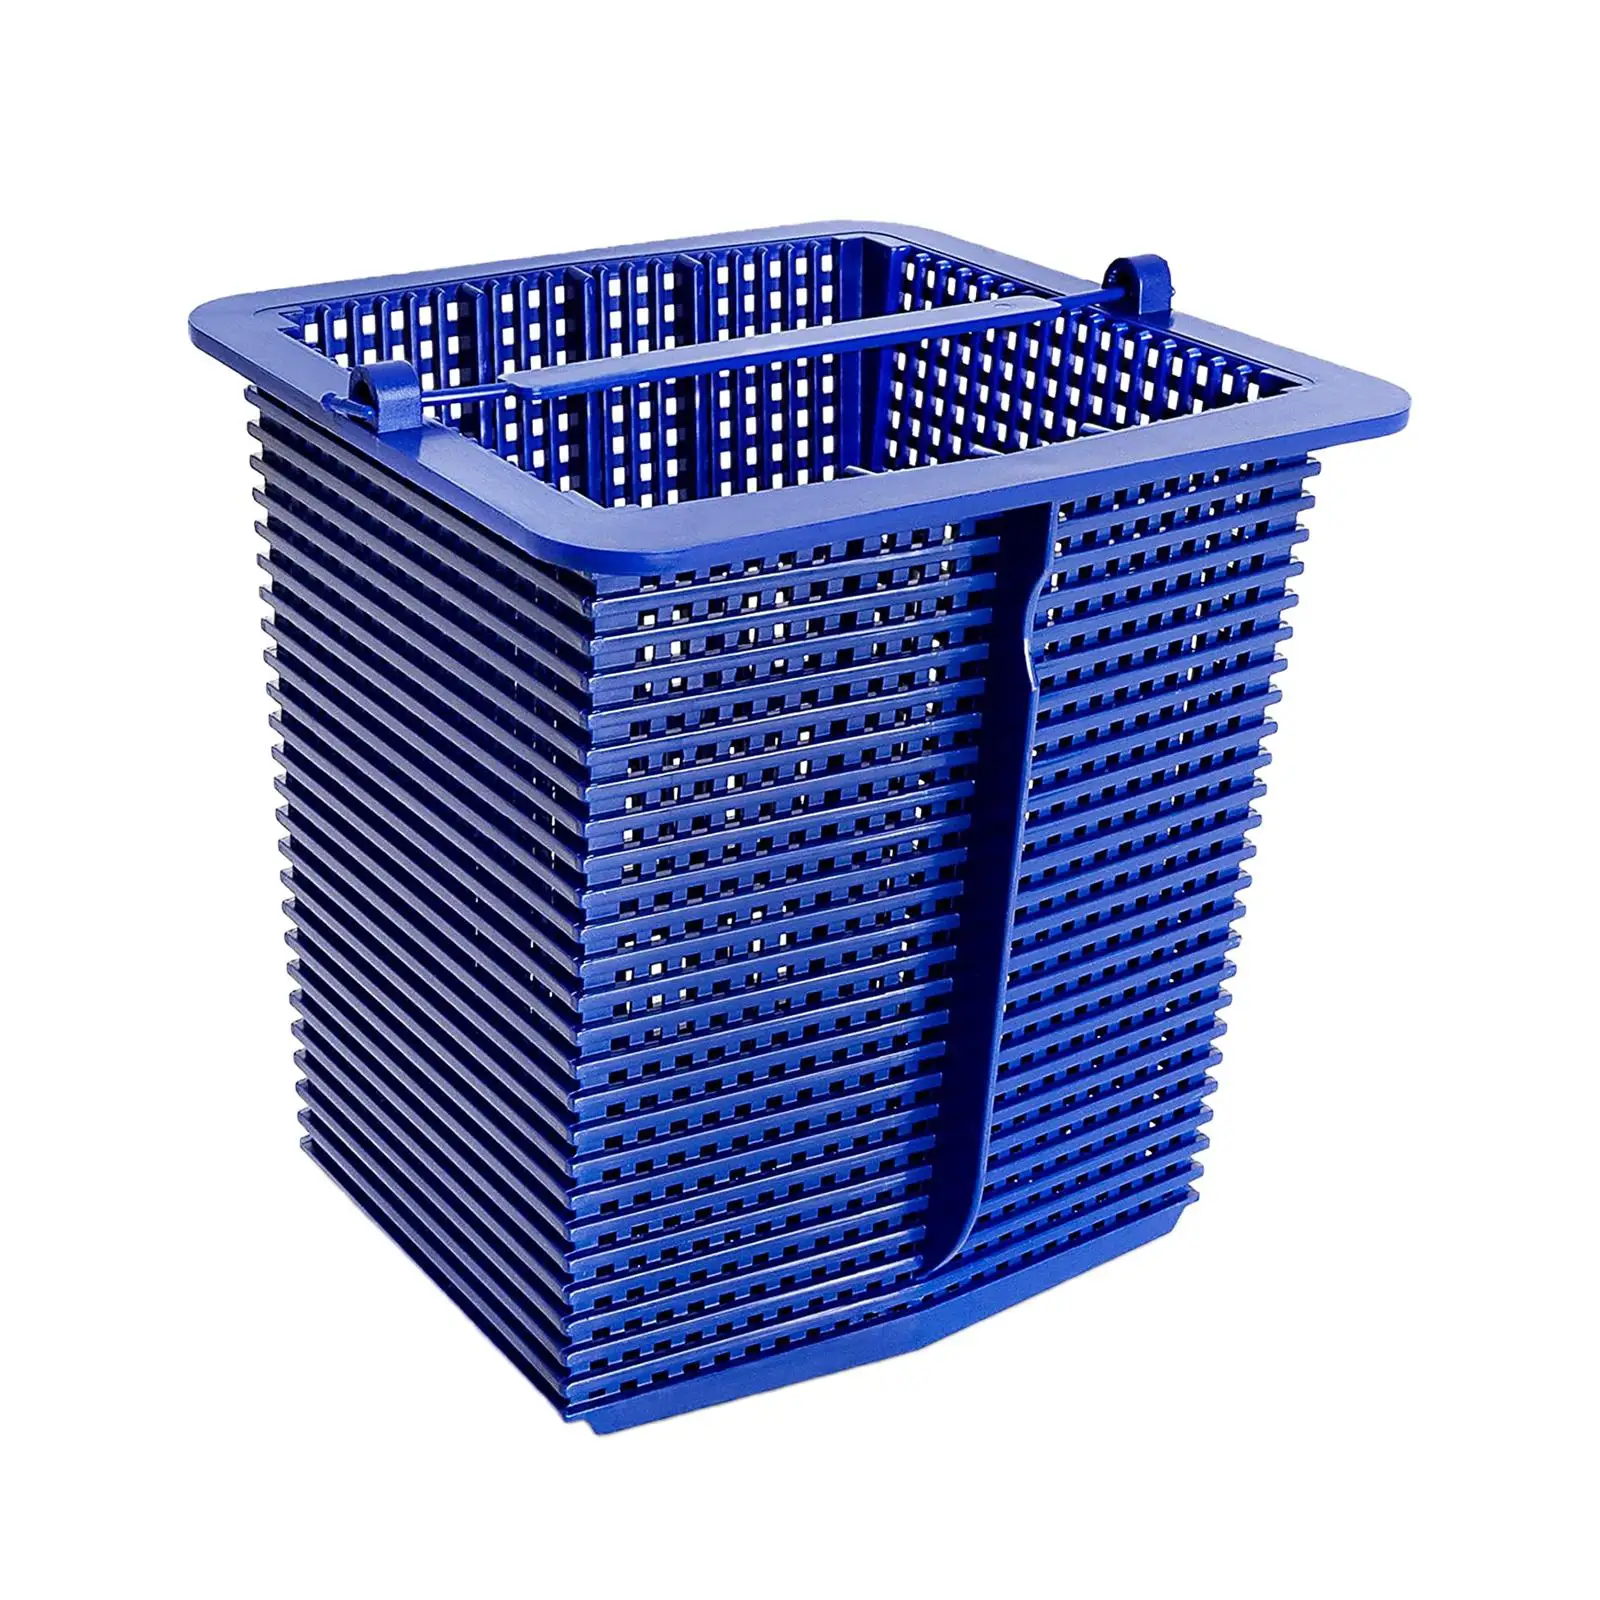 

Pump Basket Spx1600M Skimmer Basket with Handle Filter Basket for SP2607x10 SP2615x20XE SP1615x20 In Ground Pool Pump